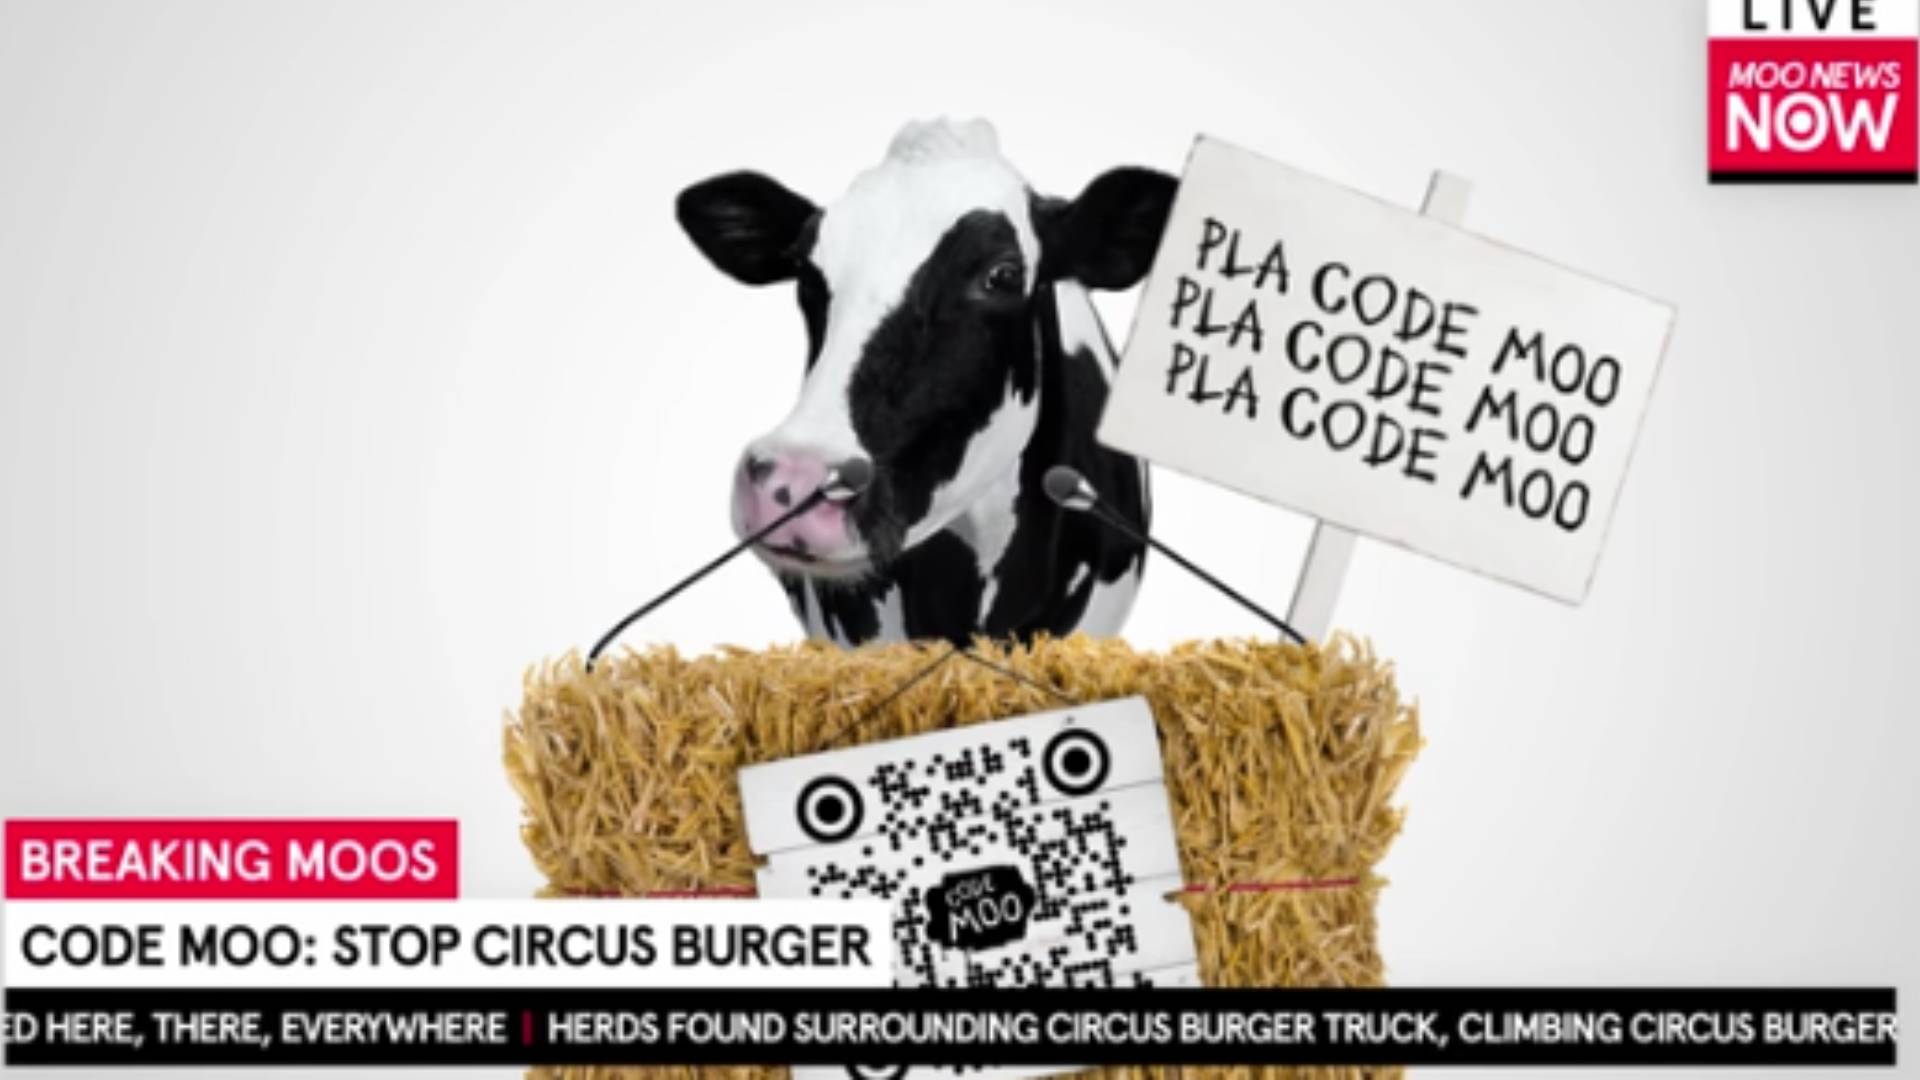 The Chick-fil-A Cows are back for a summer of fun! Join the Cows’ ‘Code Moo’ mission through a digital game, animated short film, themed merchandise and more.